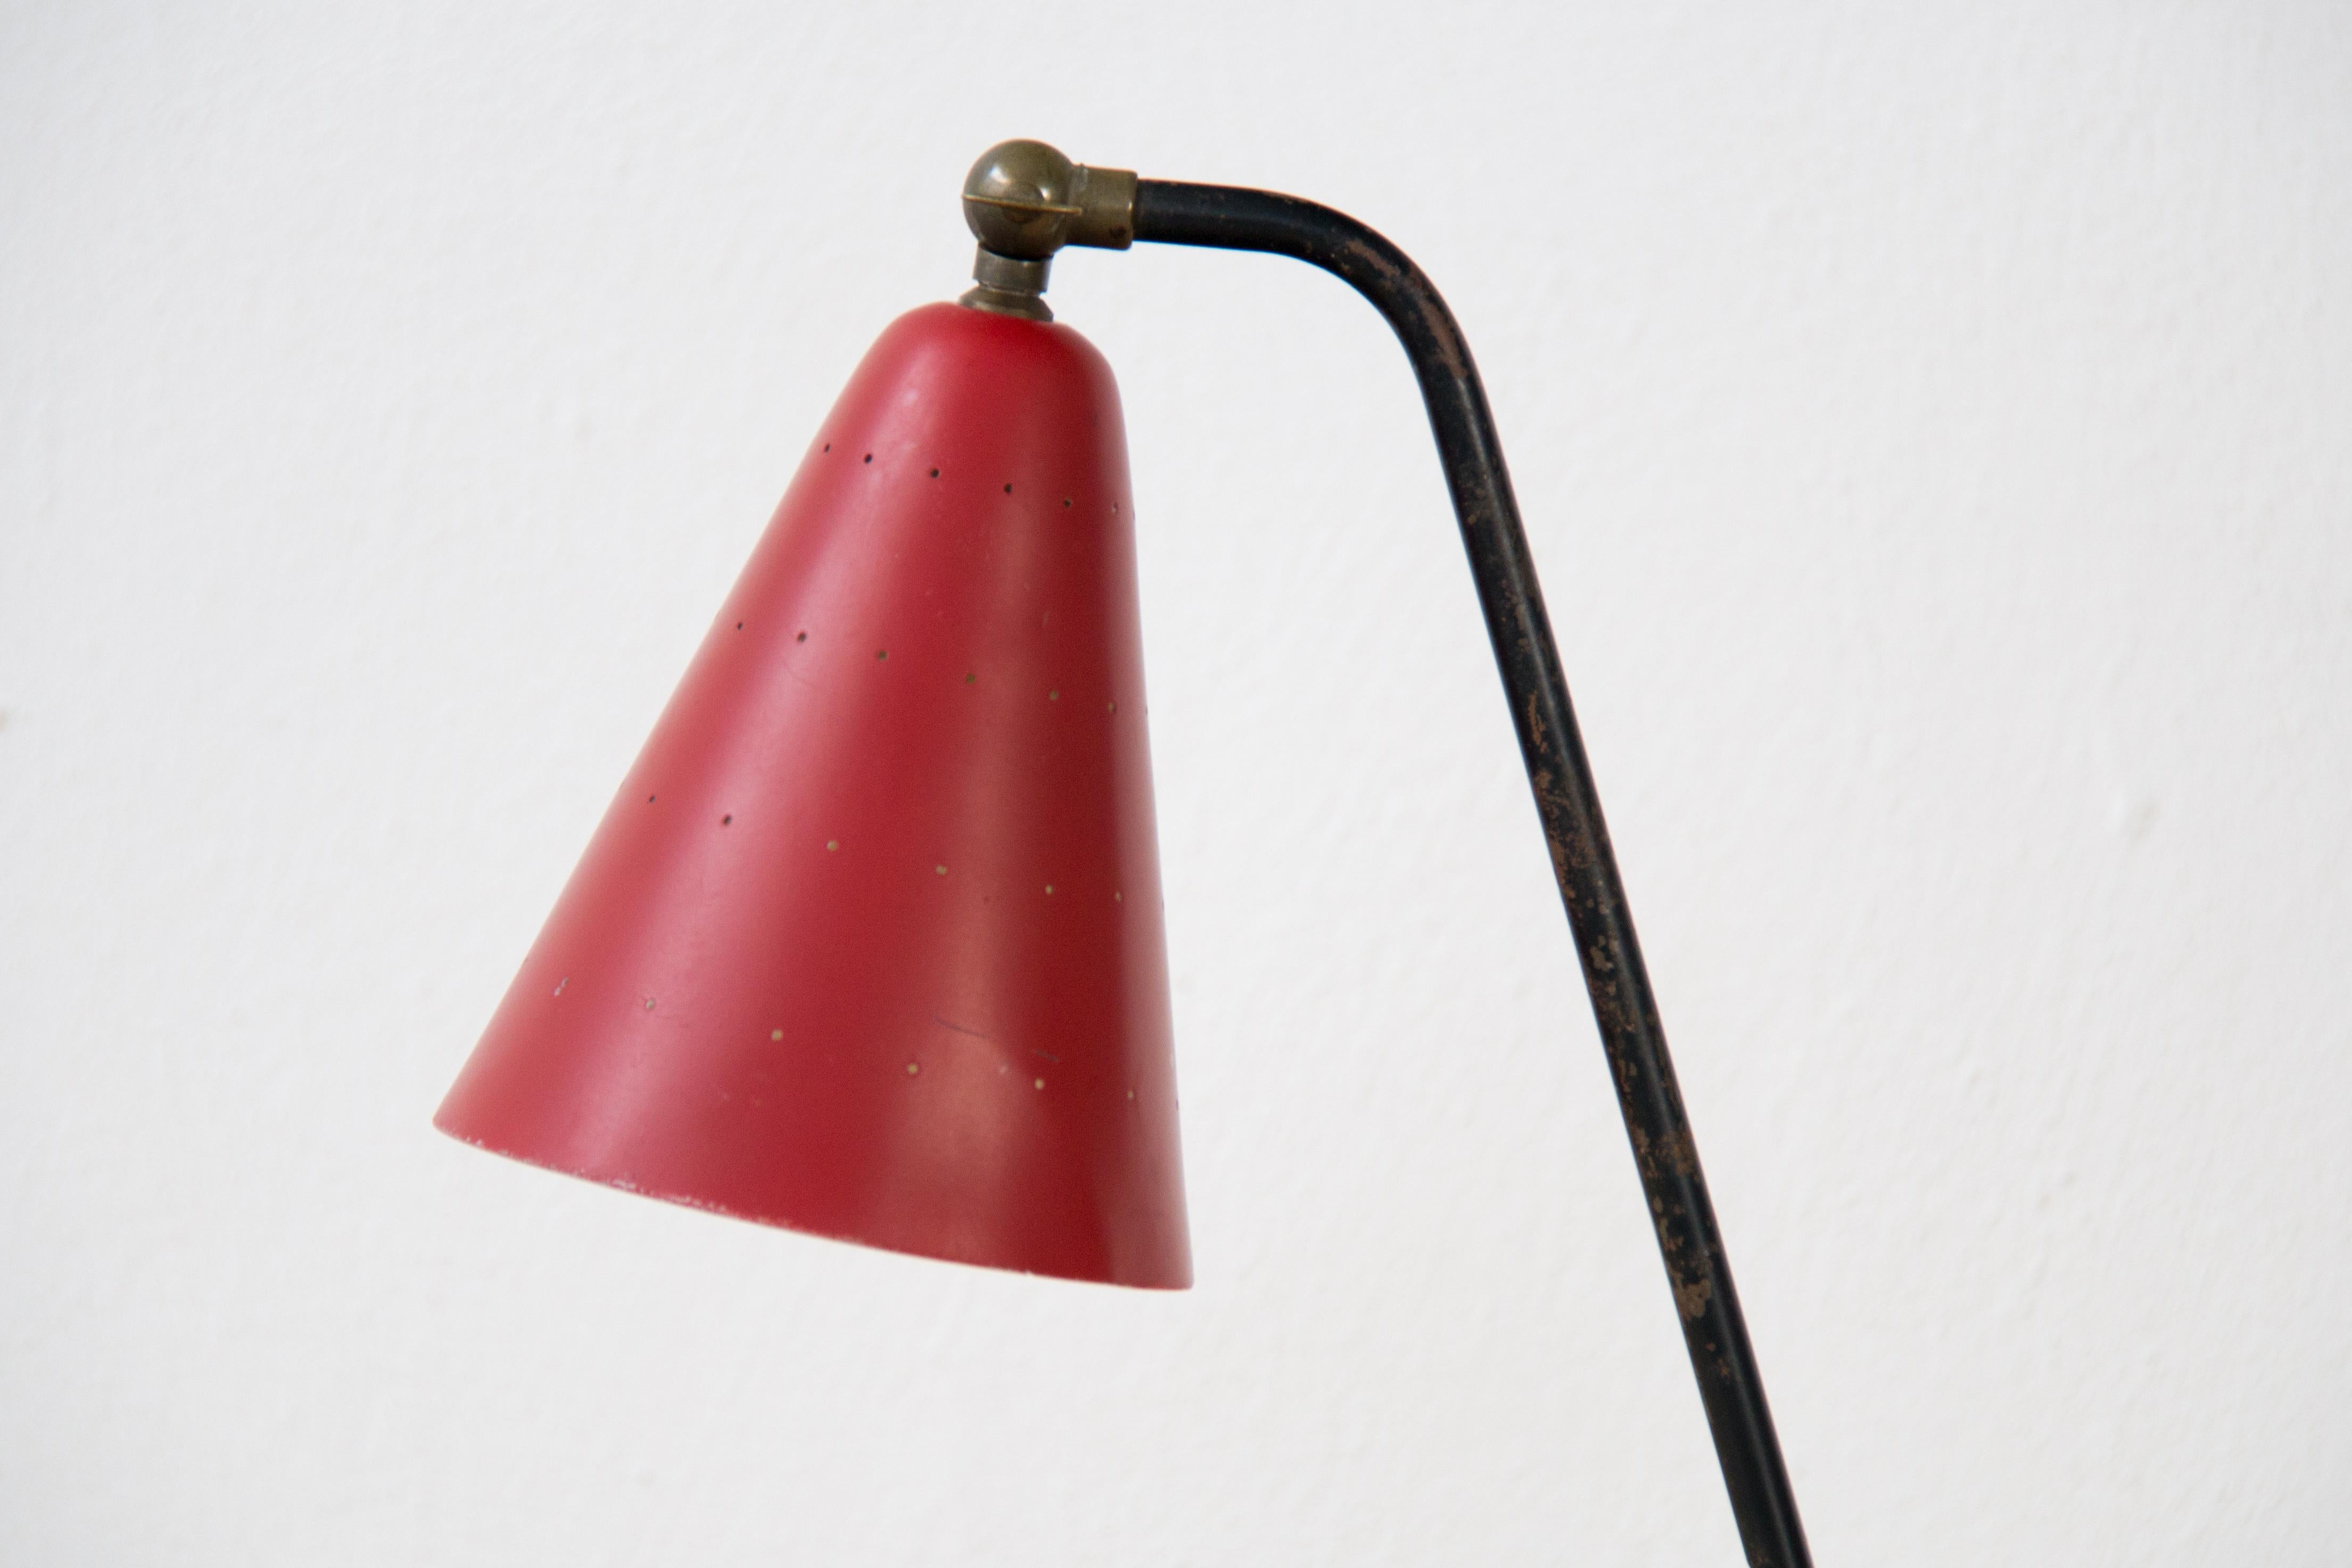 Tripod tablelamp designed by Svend Aage Holm Sorensen
Perforated adjustable screen, original red lacquer.